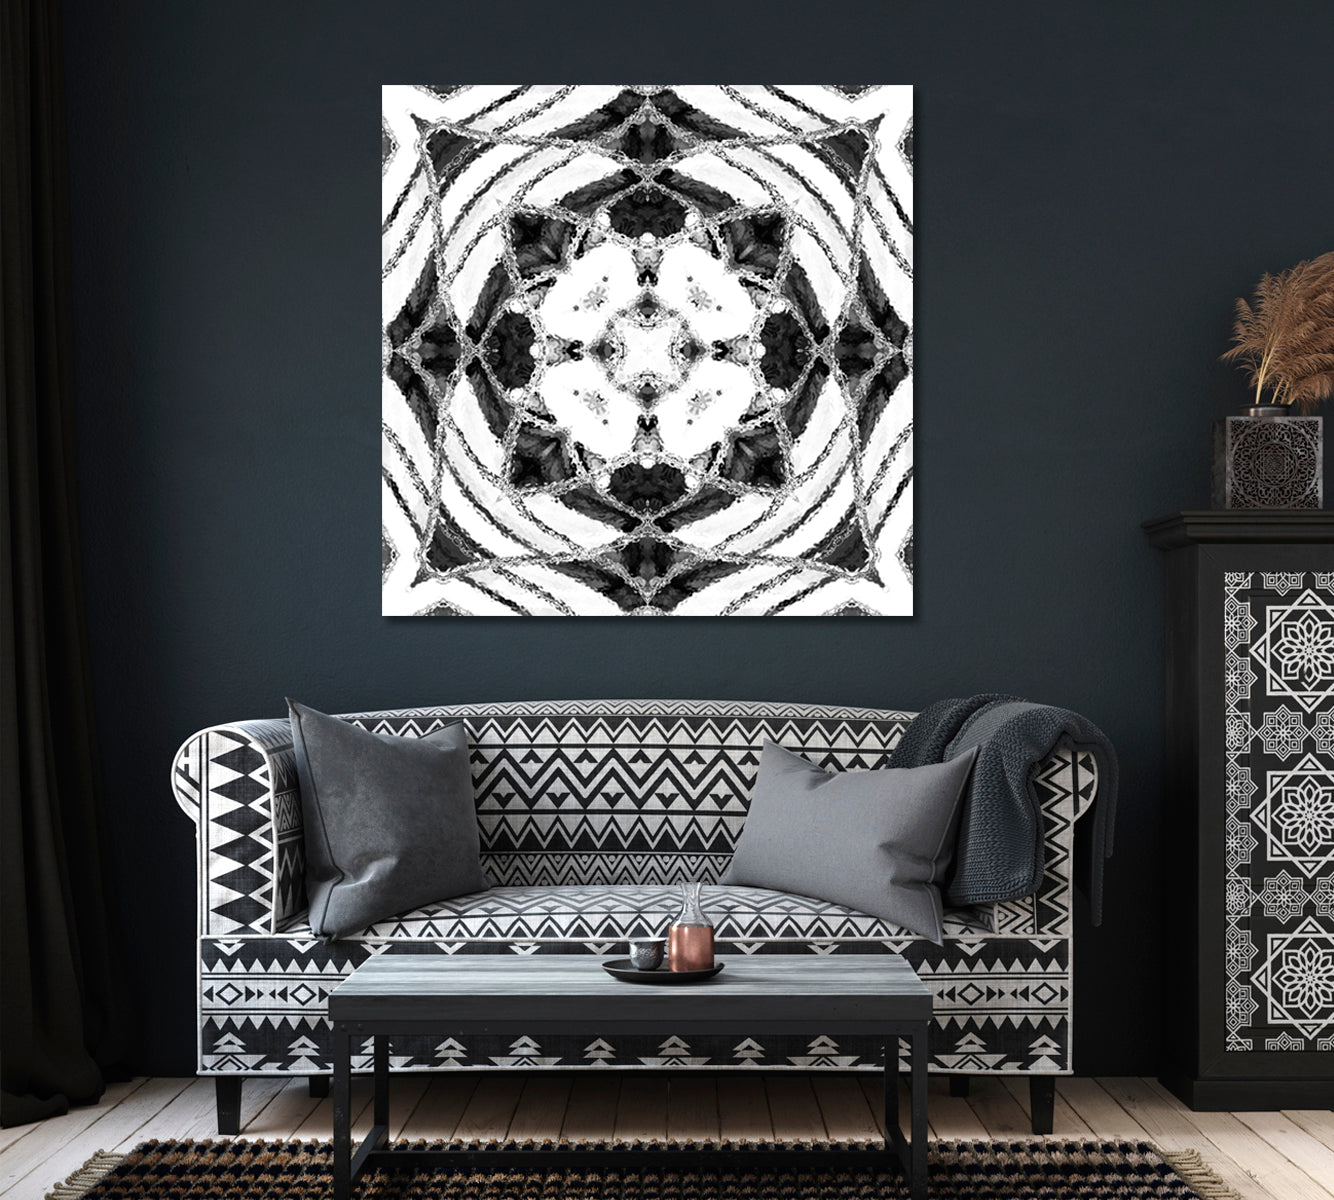 Abstract Kaleidoscope Pattern Canvas Print ArtLexy 1 Panel 12"x12" inches 